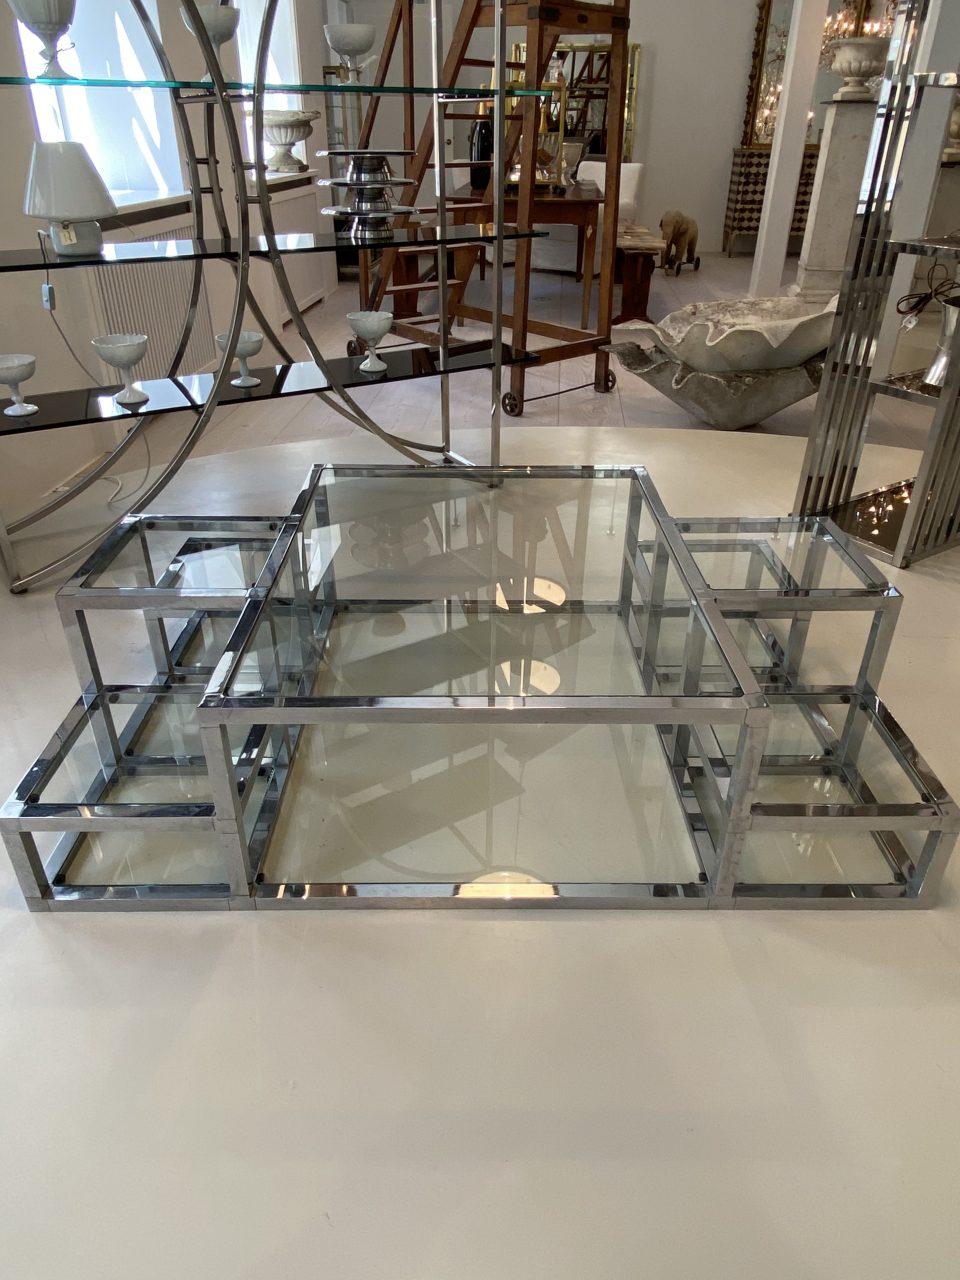 Handsome French quadrant formed coffee table, with different height glass shelves. Formed in the 1960s-1970s, with a definite nod reference to the metal and strong gorgeous designs of the Art Deco era in the 1930s.

Ideal and eye-catching as a